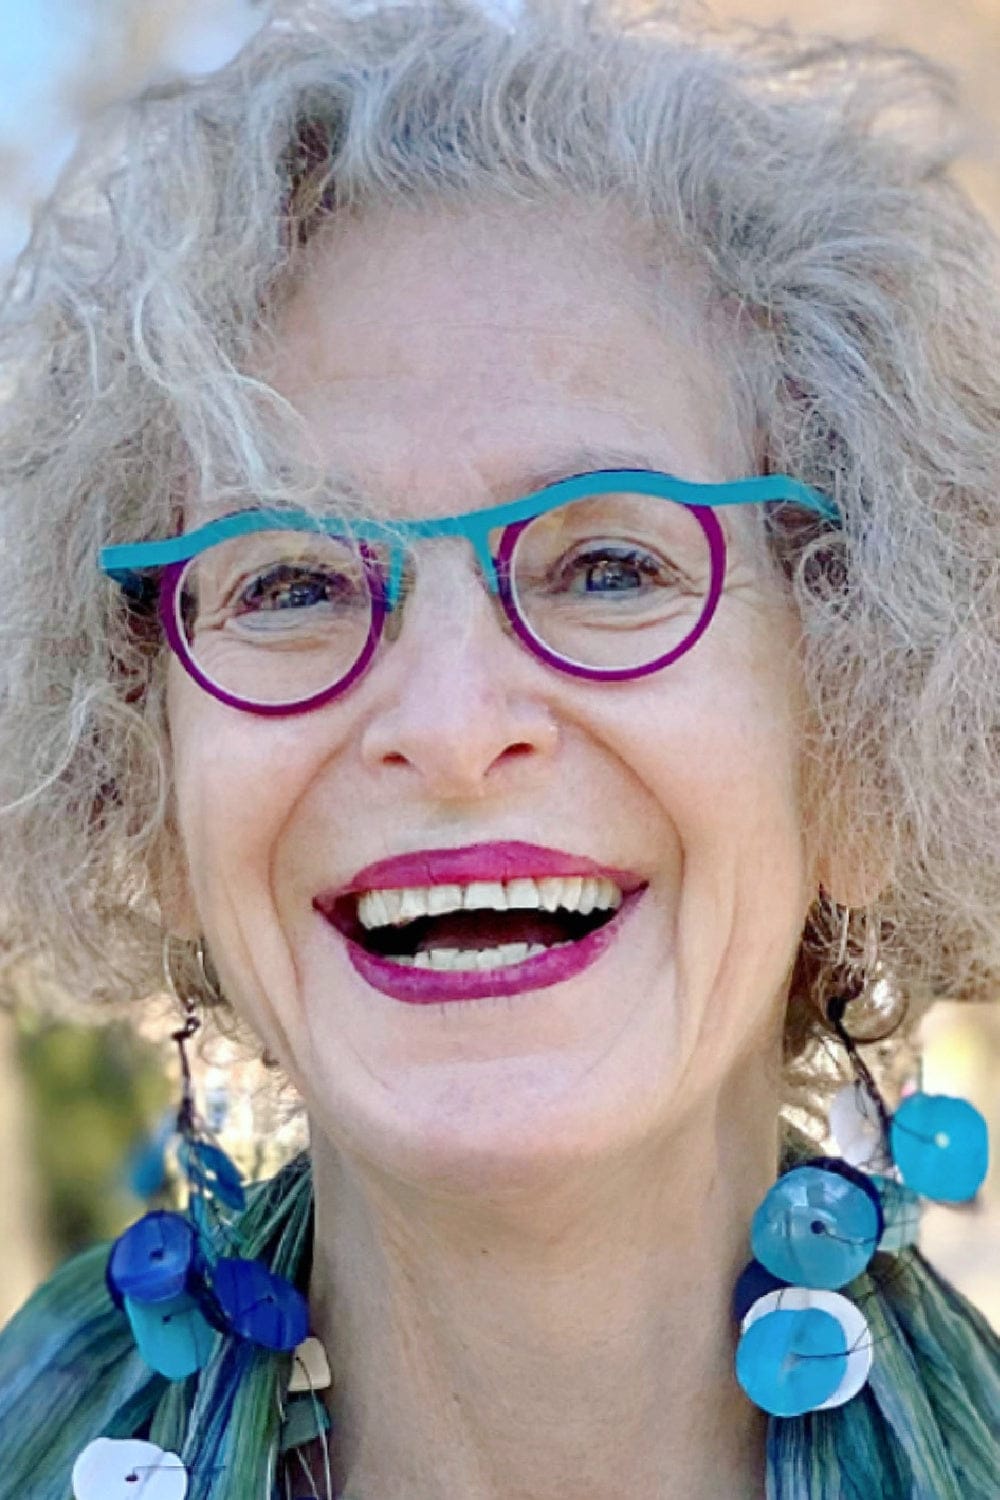 Mulit shades of blue resin earrings worn on a smiling older woman with funky glasses.